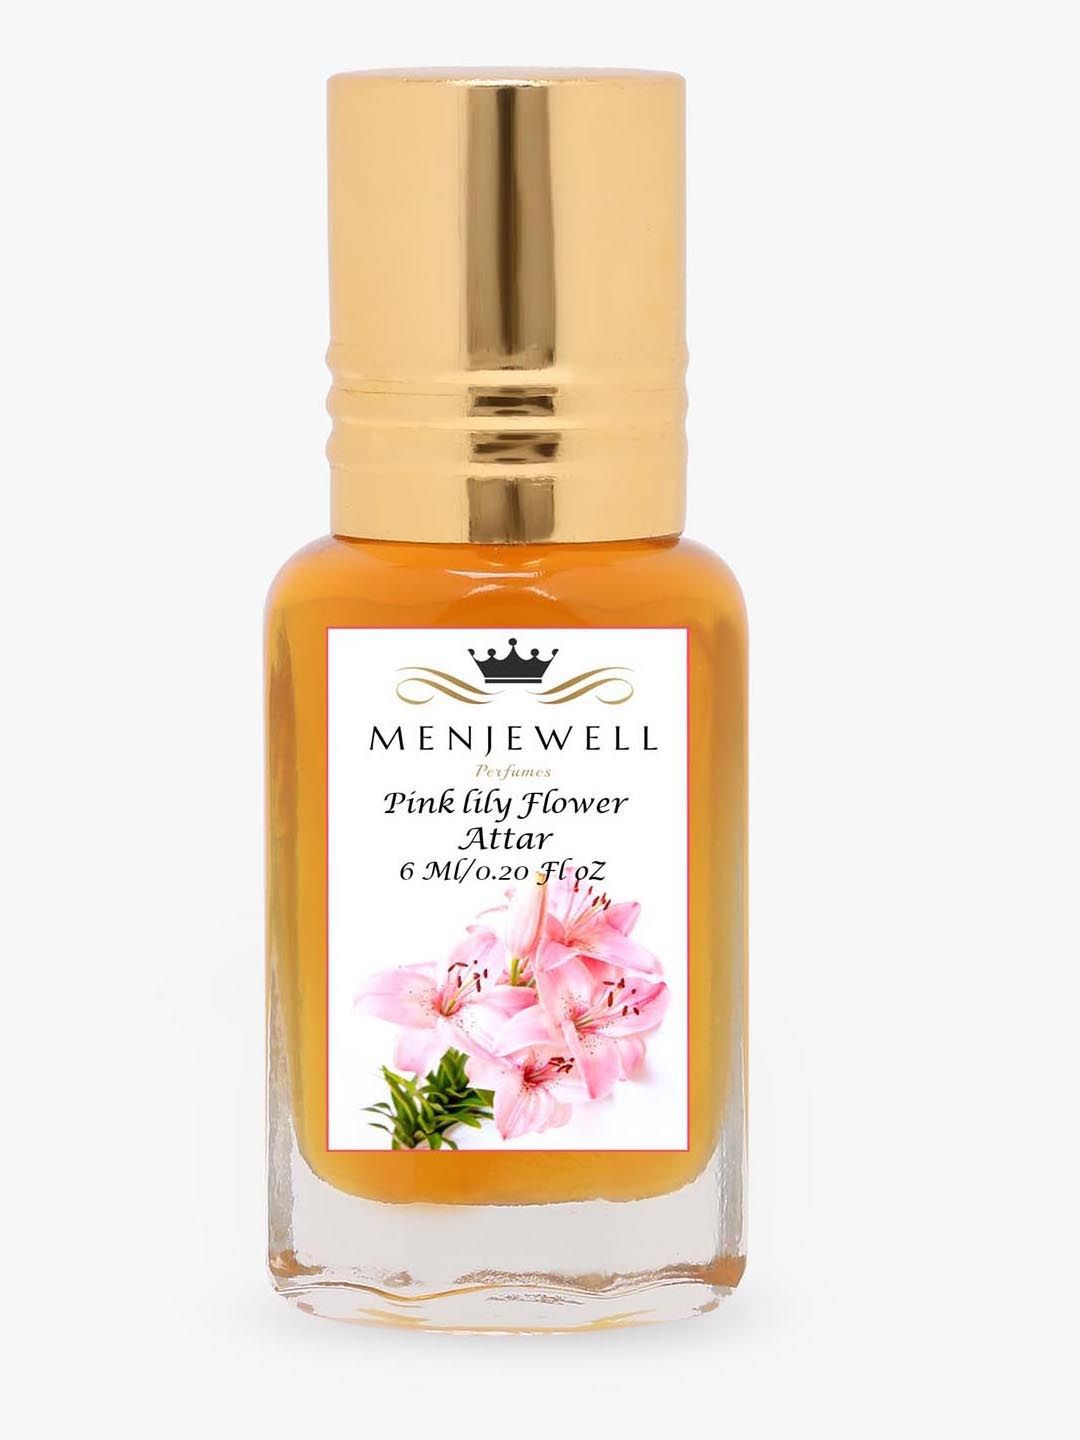 Menjewell Pinklily Flower Long Lasting Attar - 6Ml Price in India